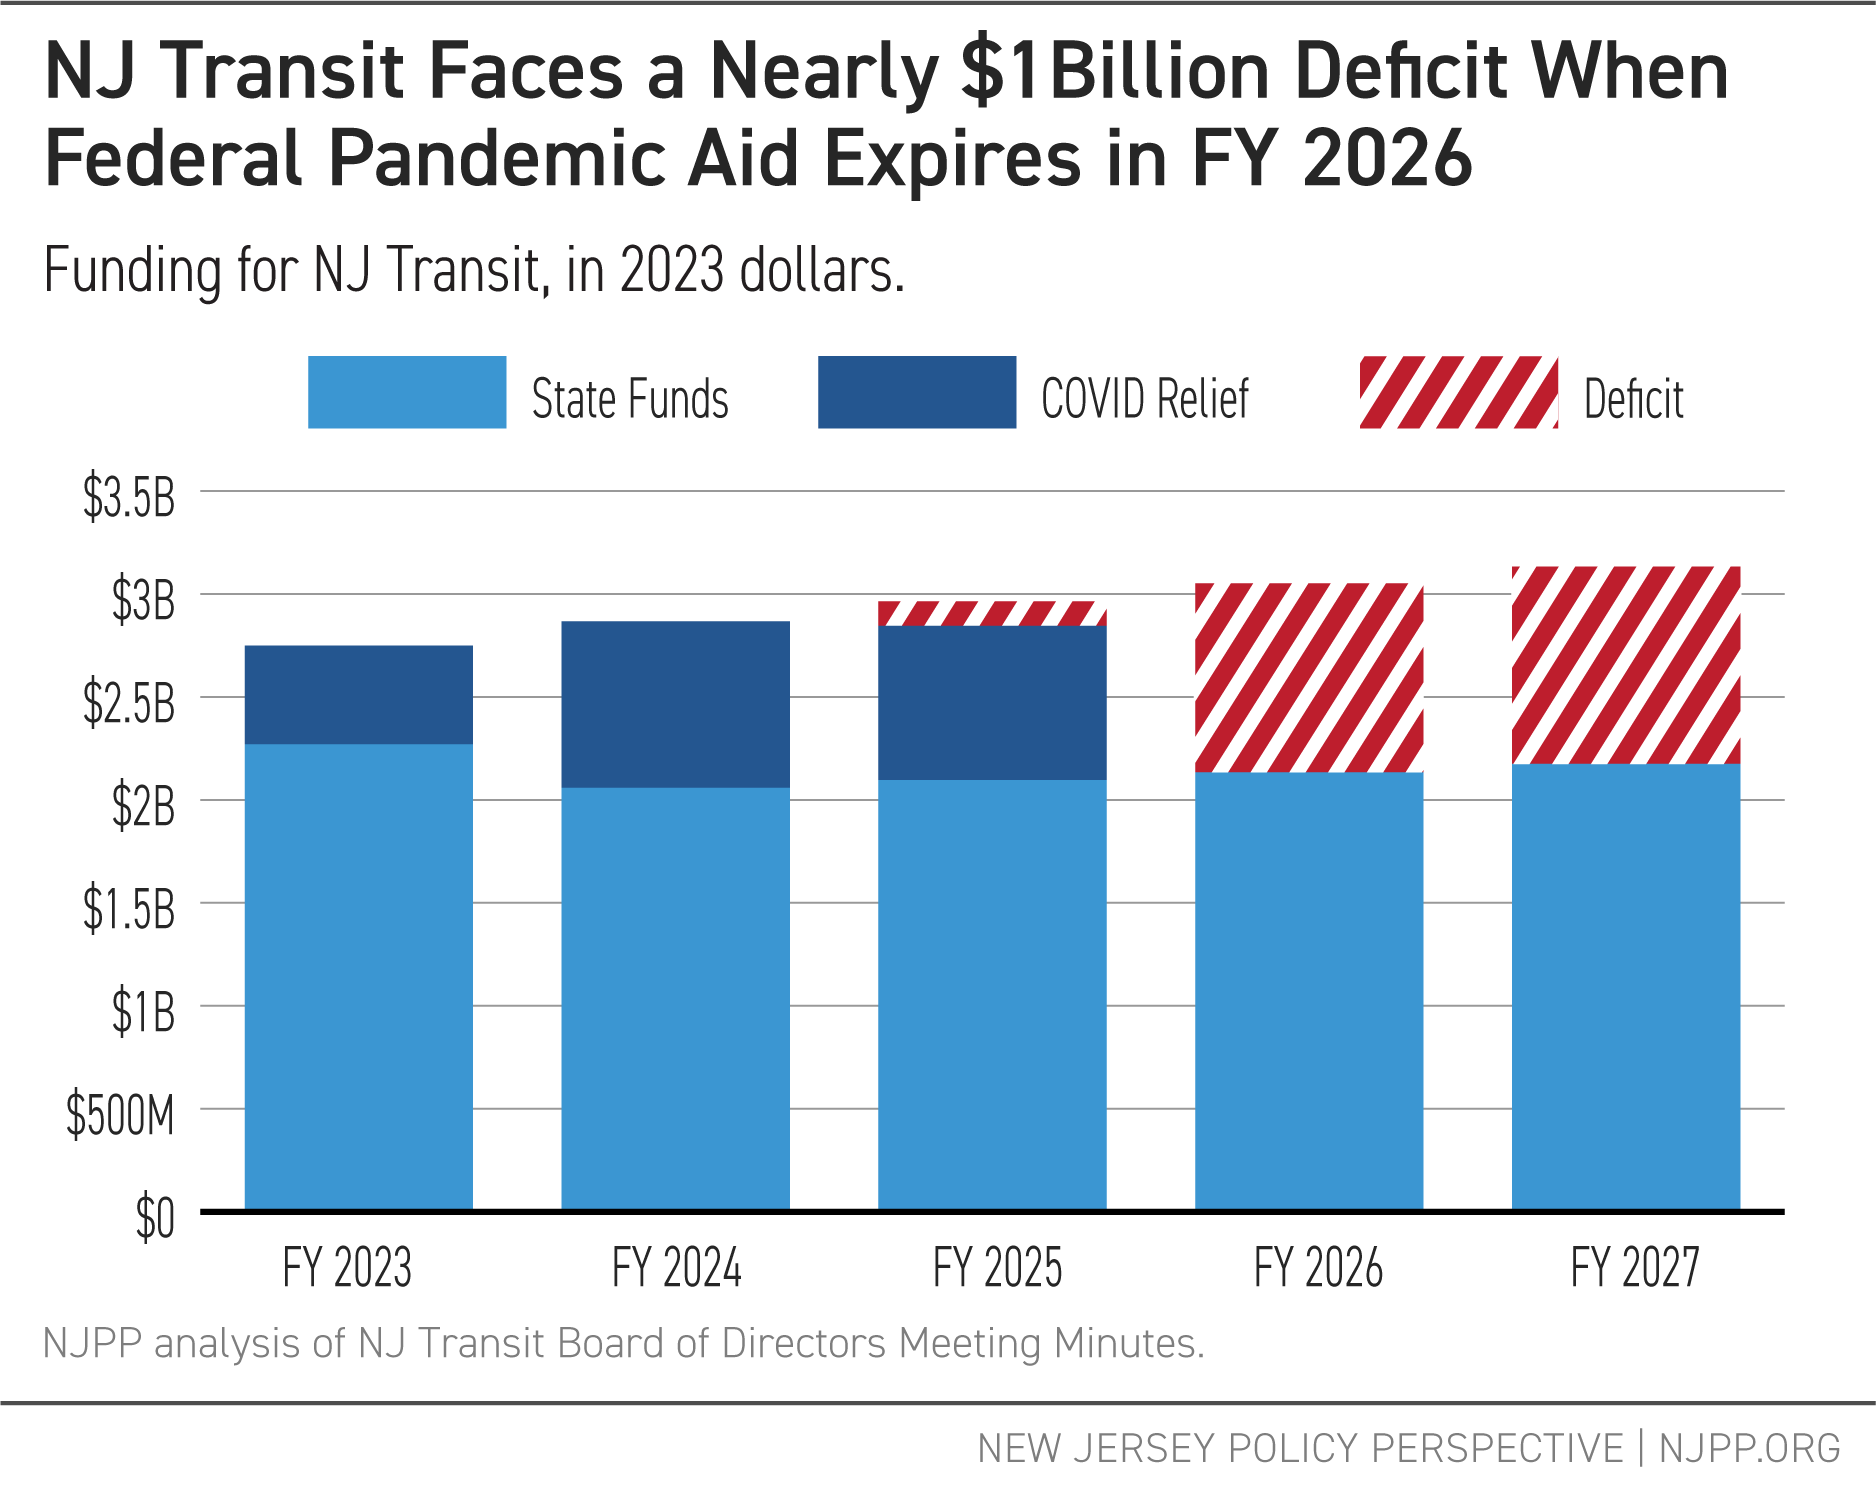 NJ Trnasit Faces a Nearly $1 Billion Deficit When Federal Pandemic Aid Expires in FY 2026